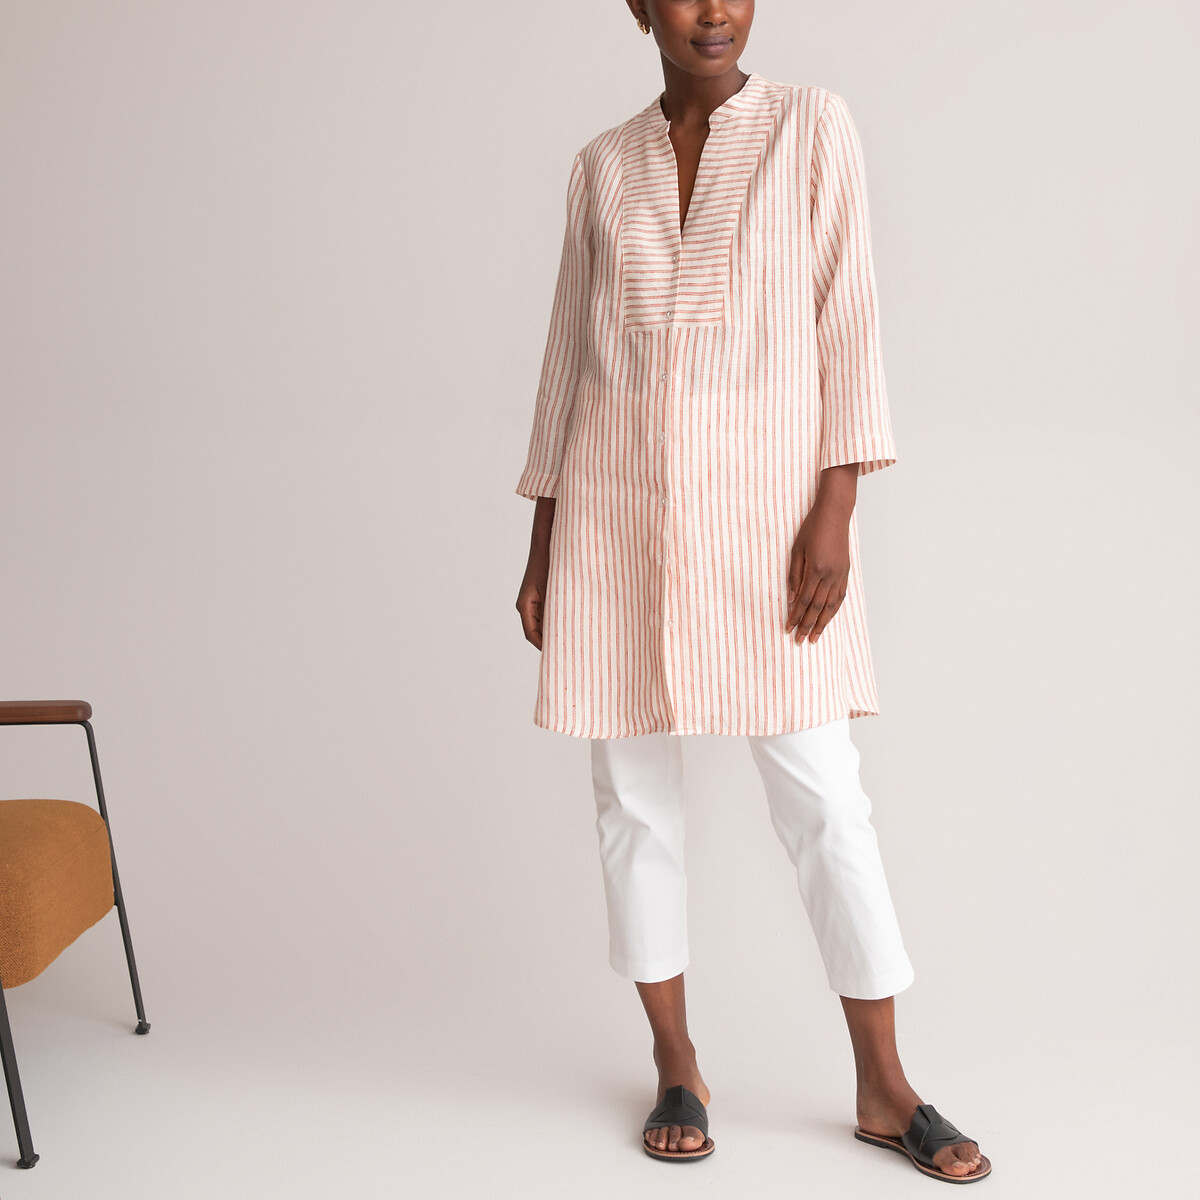 Striped Linen Tunic with a Grandad Collar and 3/4 Length Sleeves